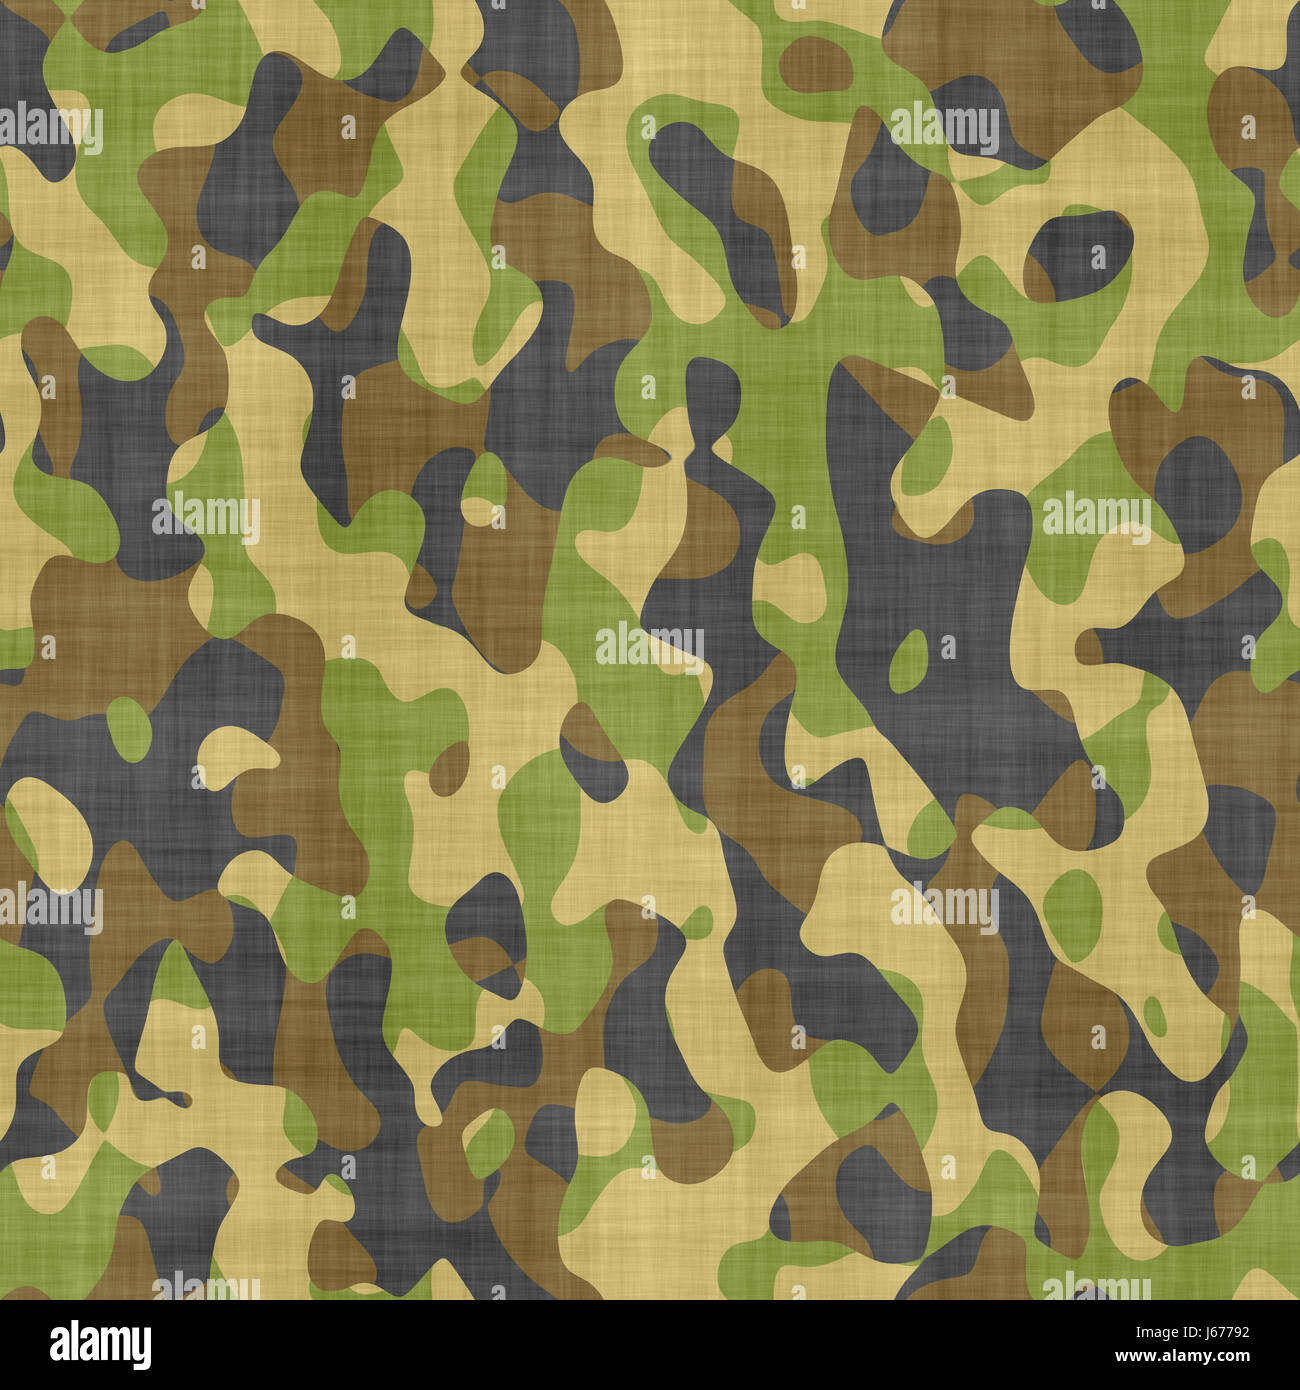 army camouflage patterned military pattern abandon go away depart disappear Stock Photo